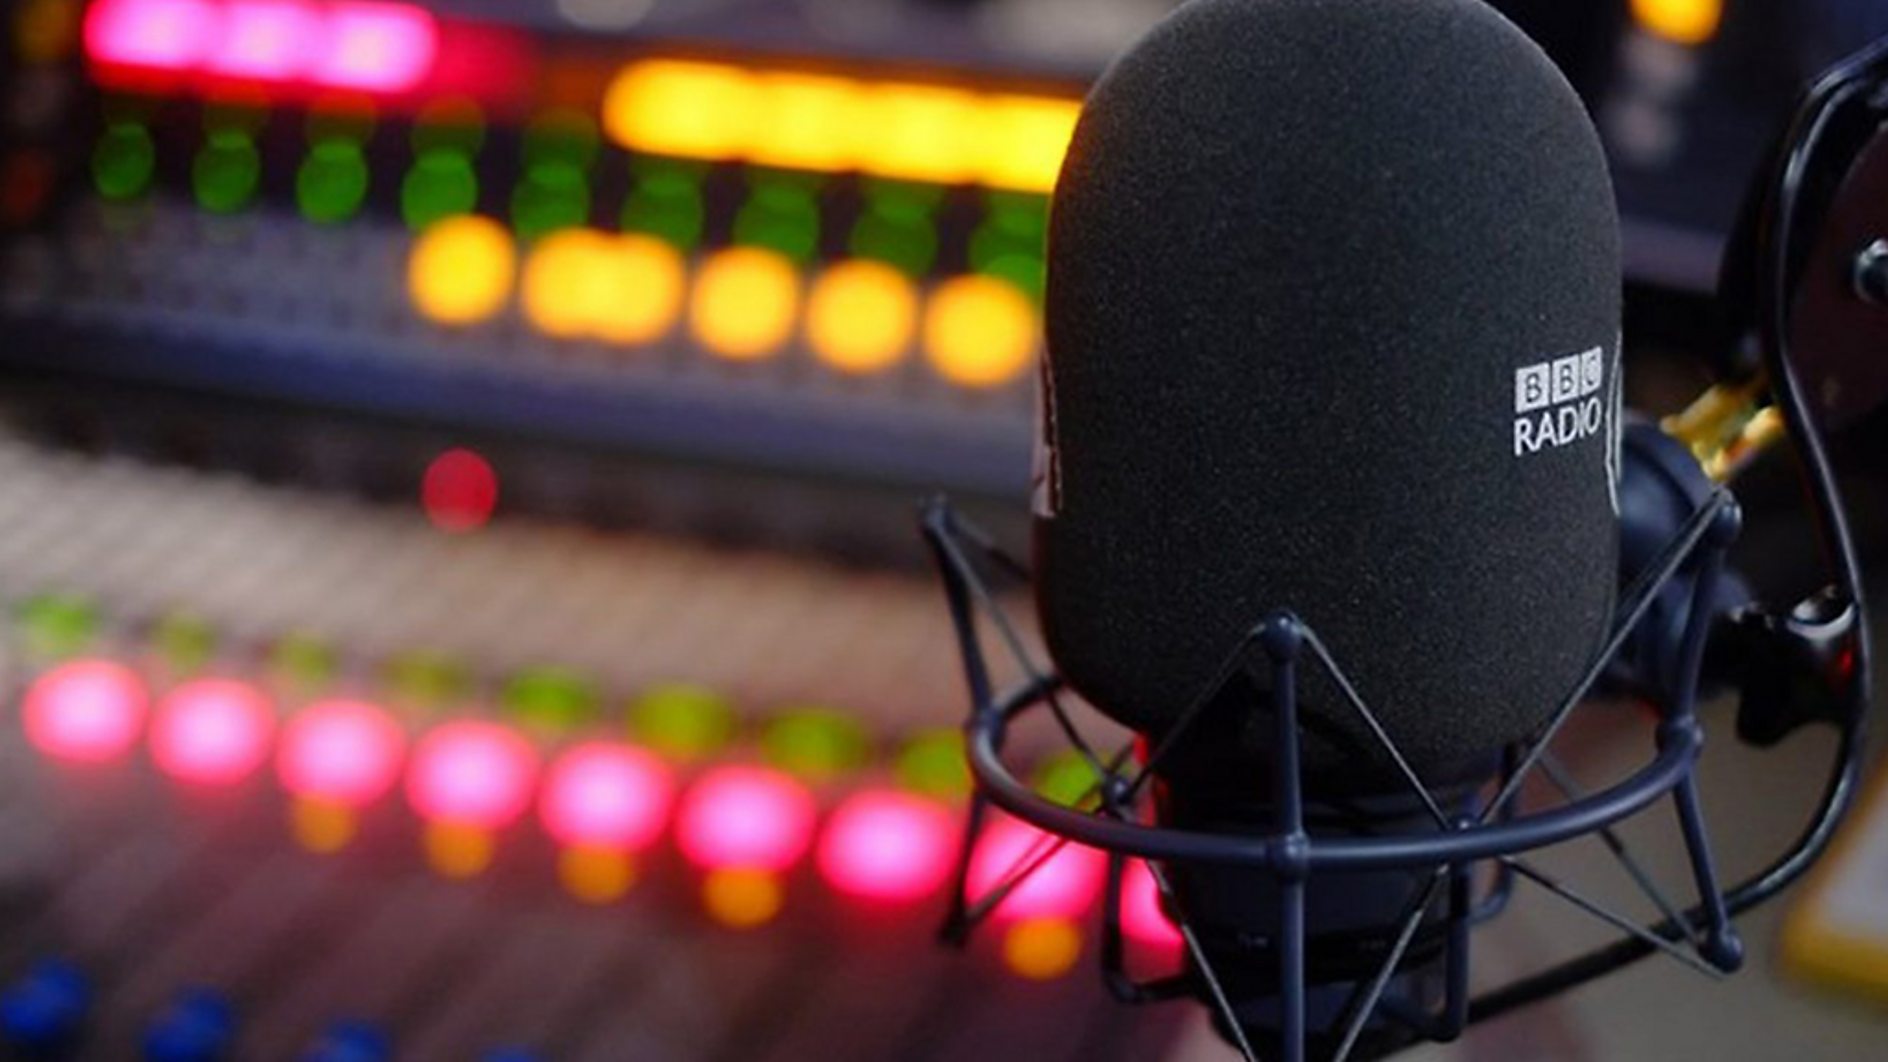 New recipients from across the UK confirmed for BBC Radio Indie Development Fund